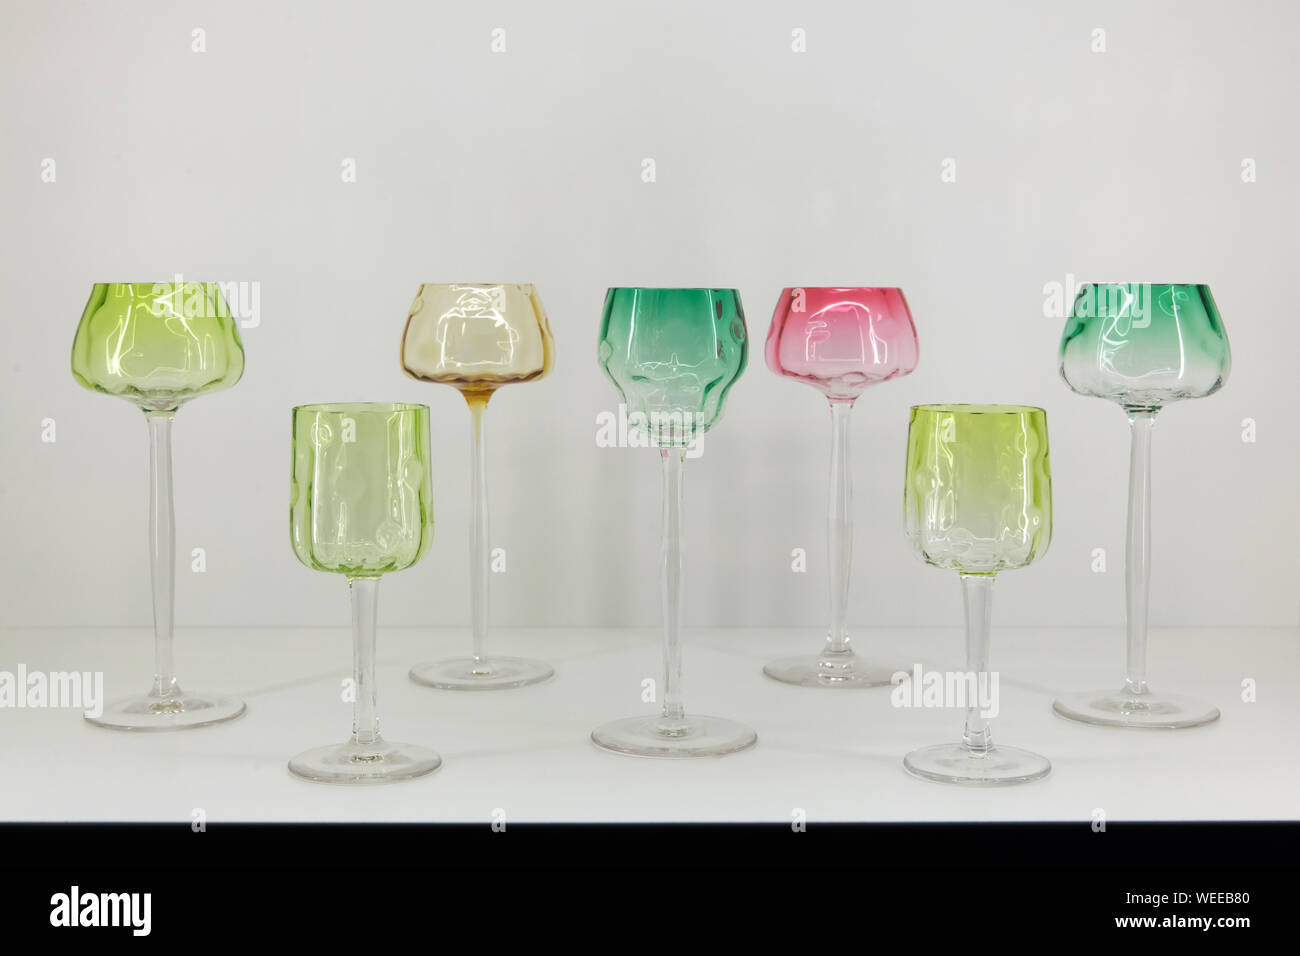 Stem glasses from the dinner set 'Meteor No. 100' designed by Austrian modernist artist Koloman Moser for E. Bakalowits Söhne (1899) on display in the Leopold Museum in Vienna, Austria. Stock Photo